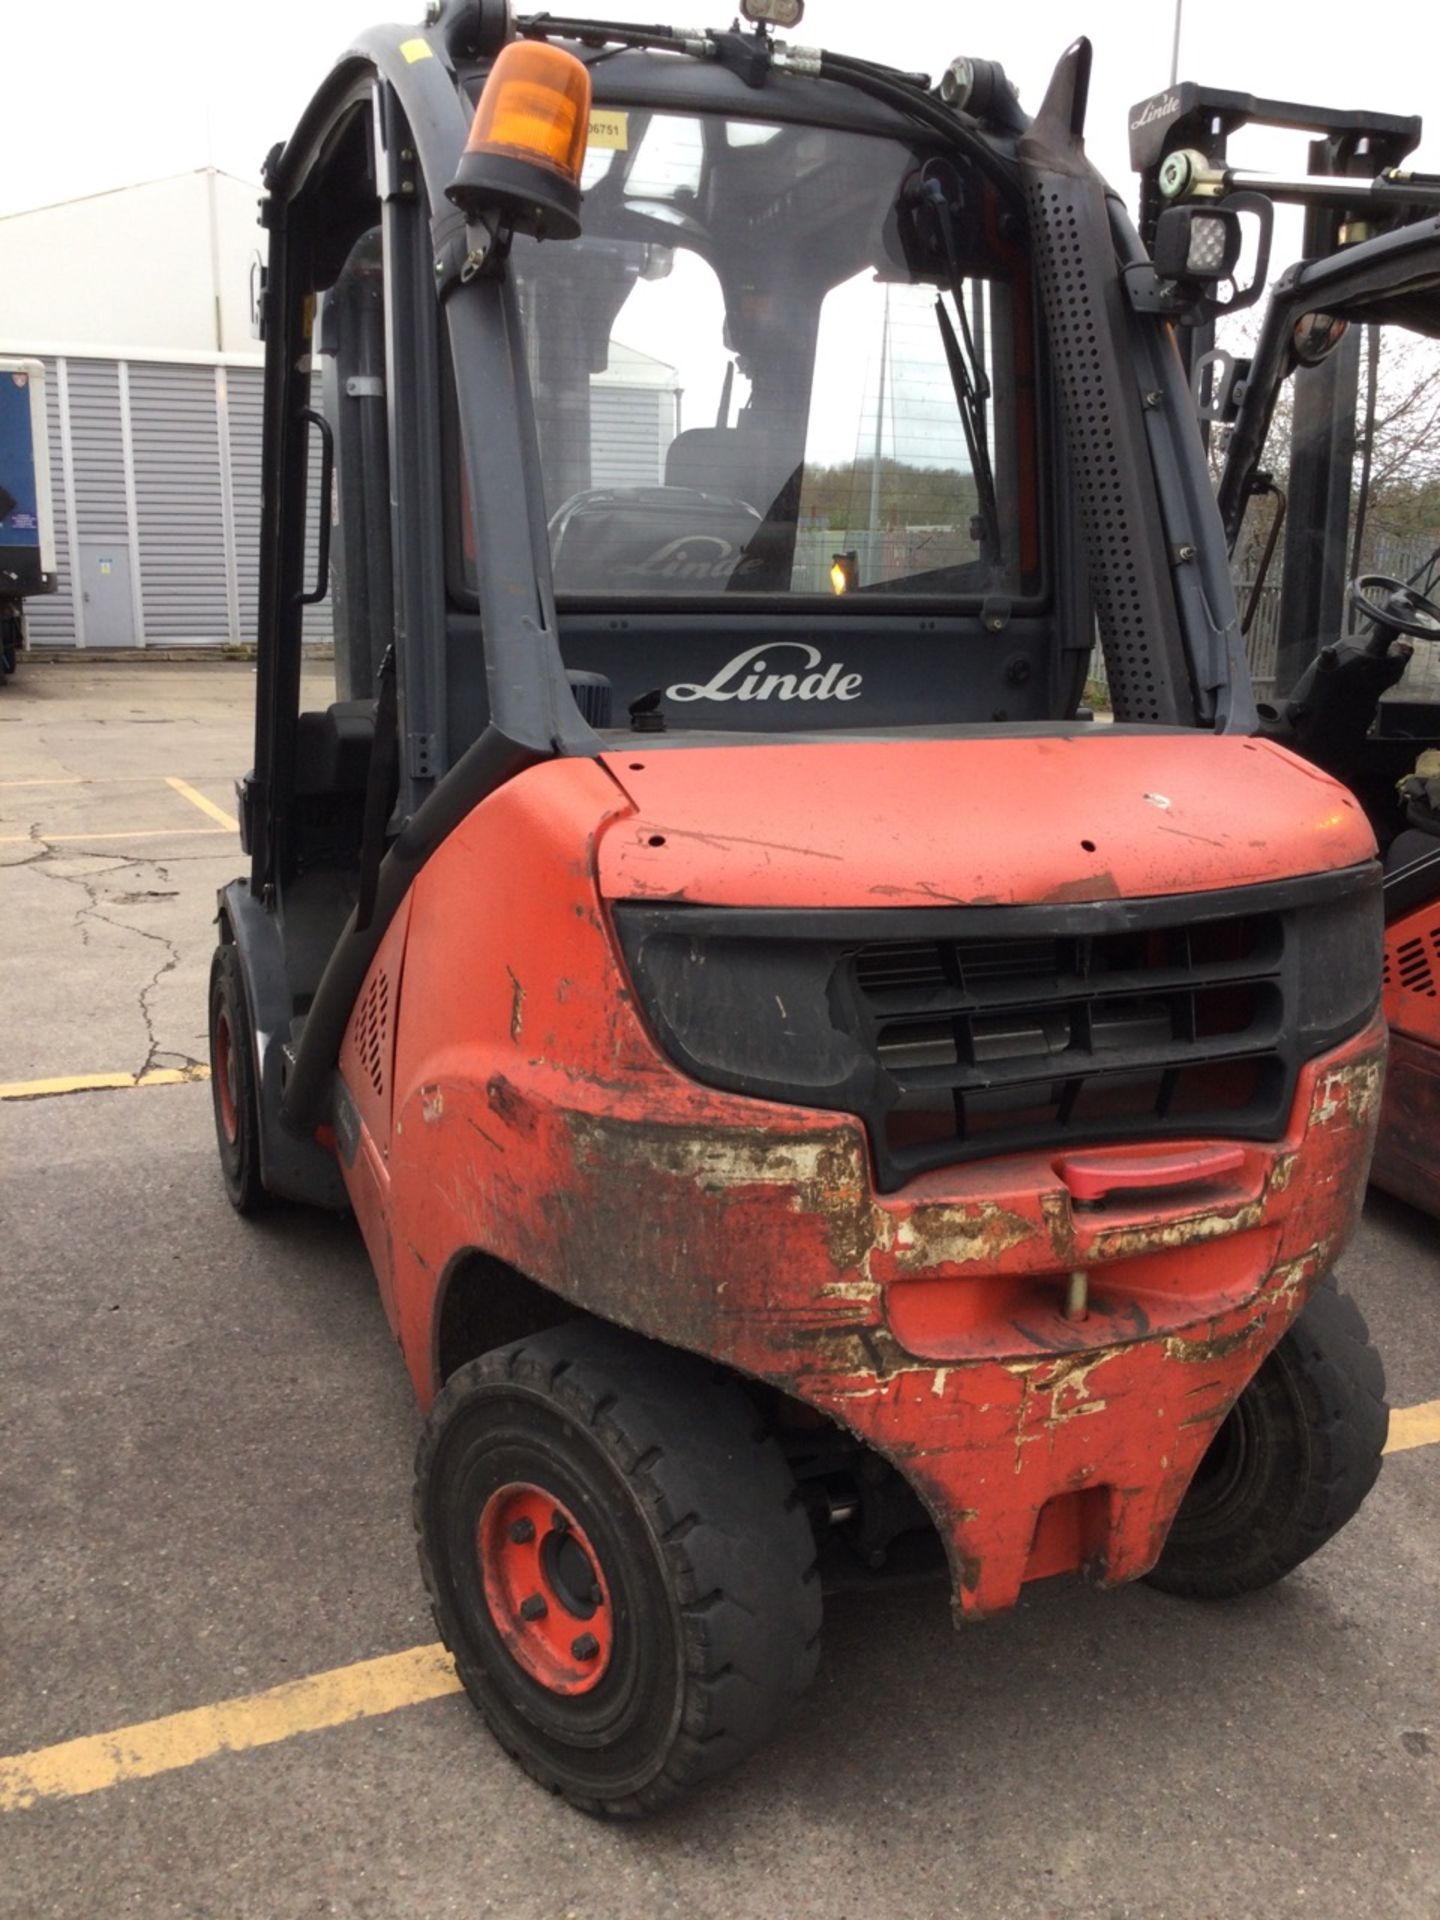 Linde H35D-02 Counterbalance Diesel Fuelled Fork Lift Truck With Two Stage Mast And Sideshift, 13318 - Image 2 of 4